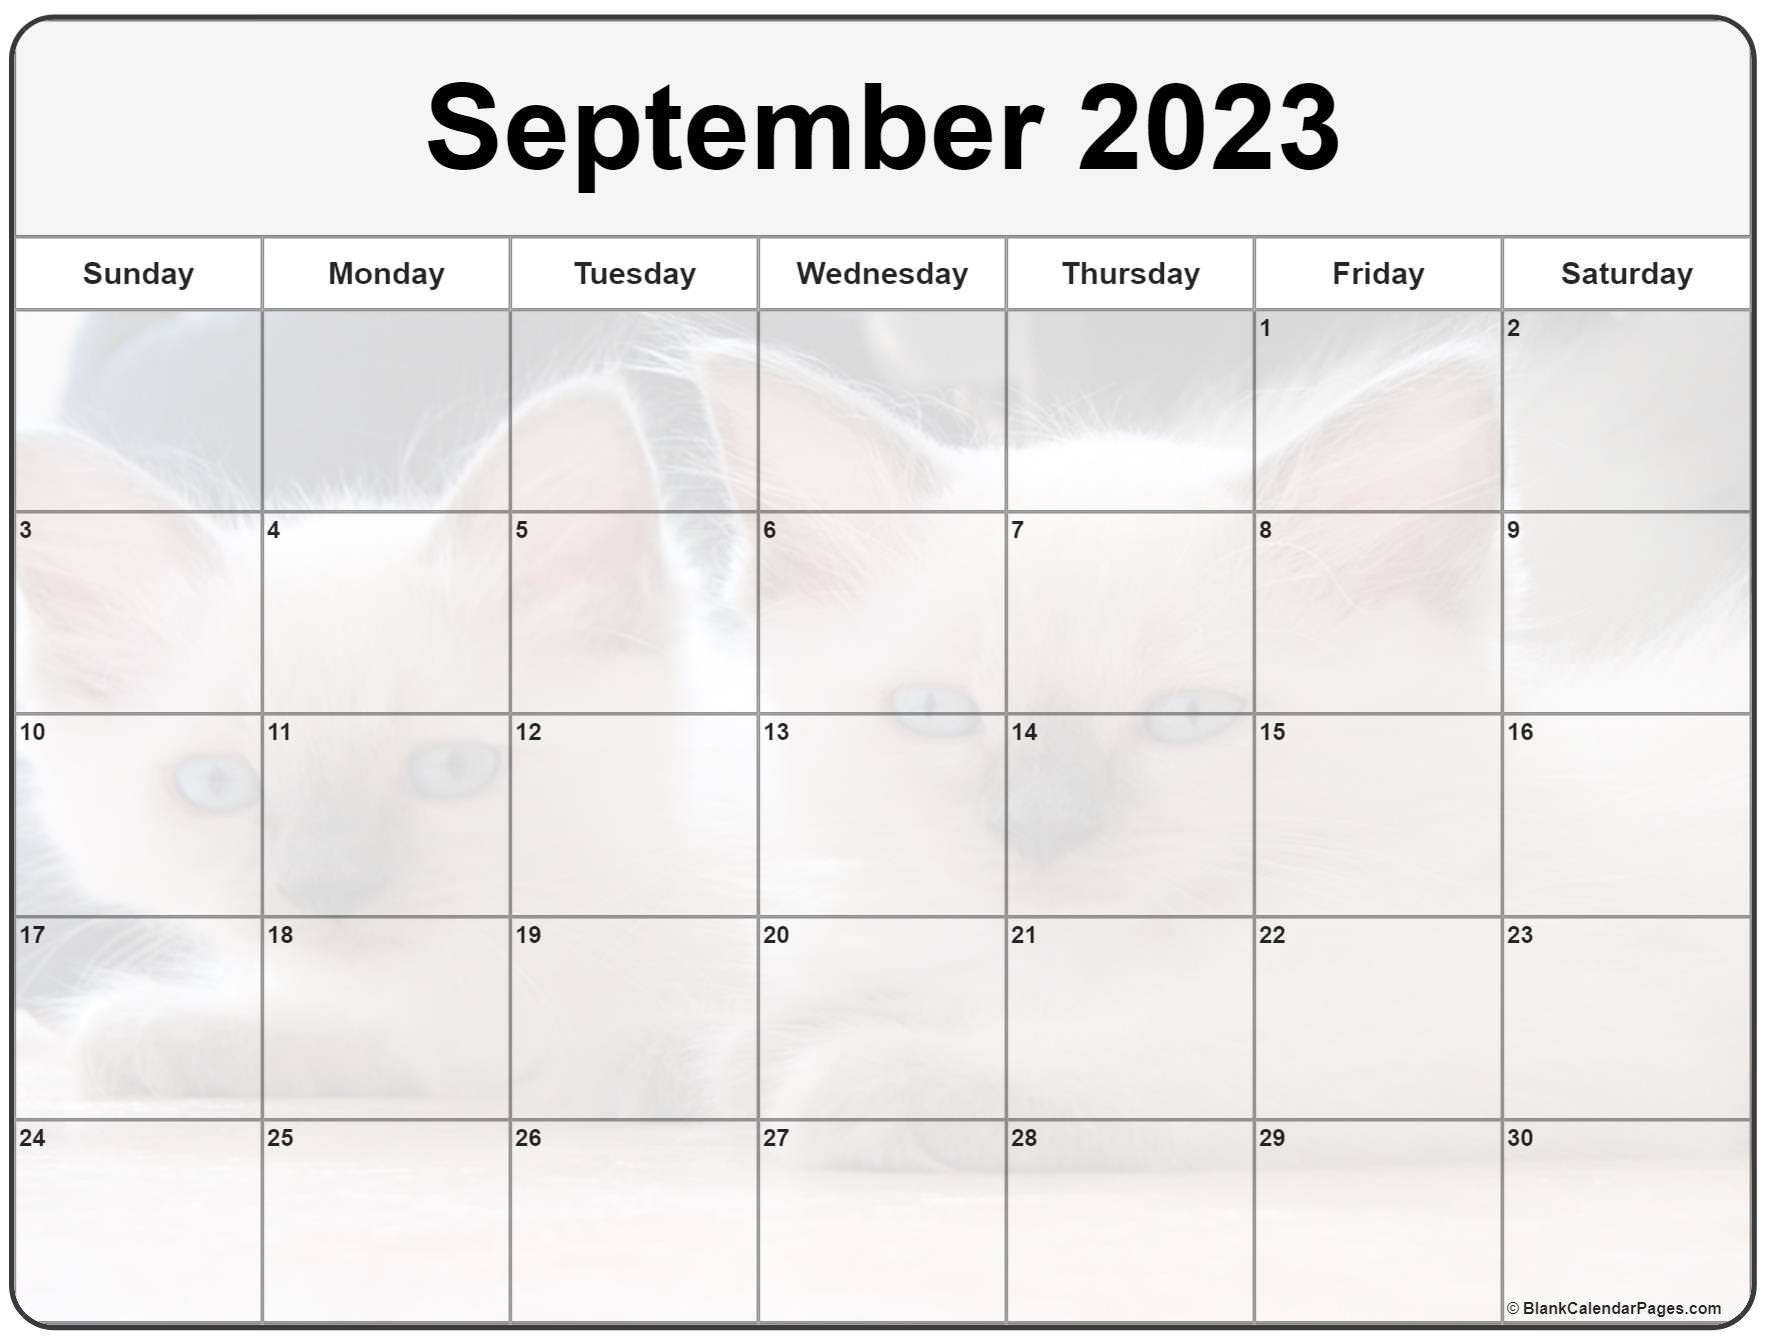 september-2023-calendar-printable-free-2023-cool-latest-review-of